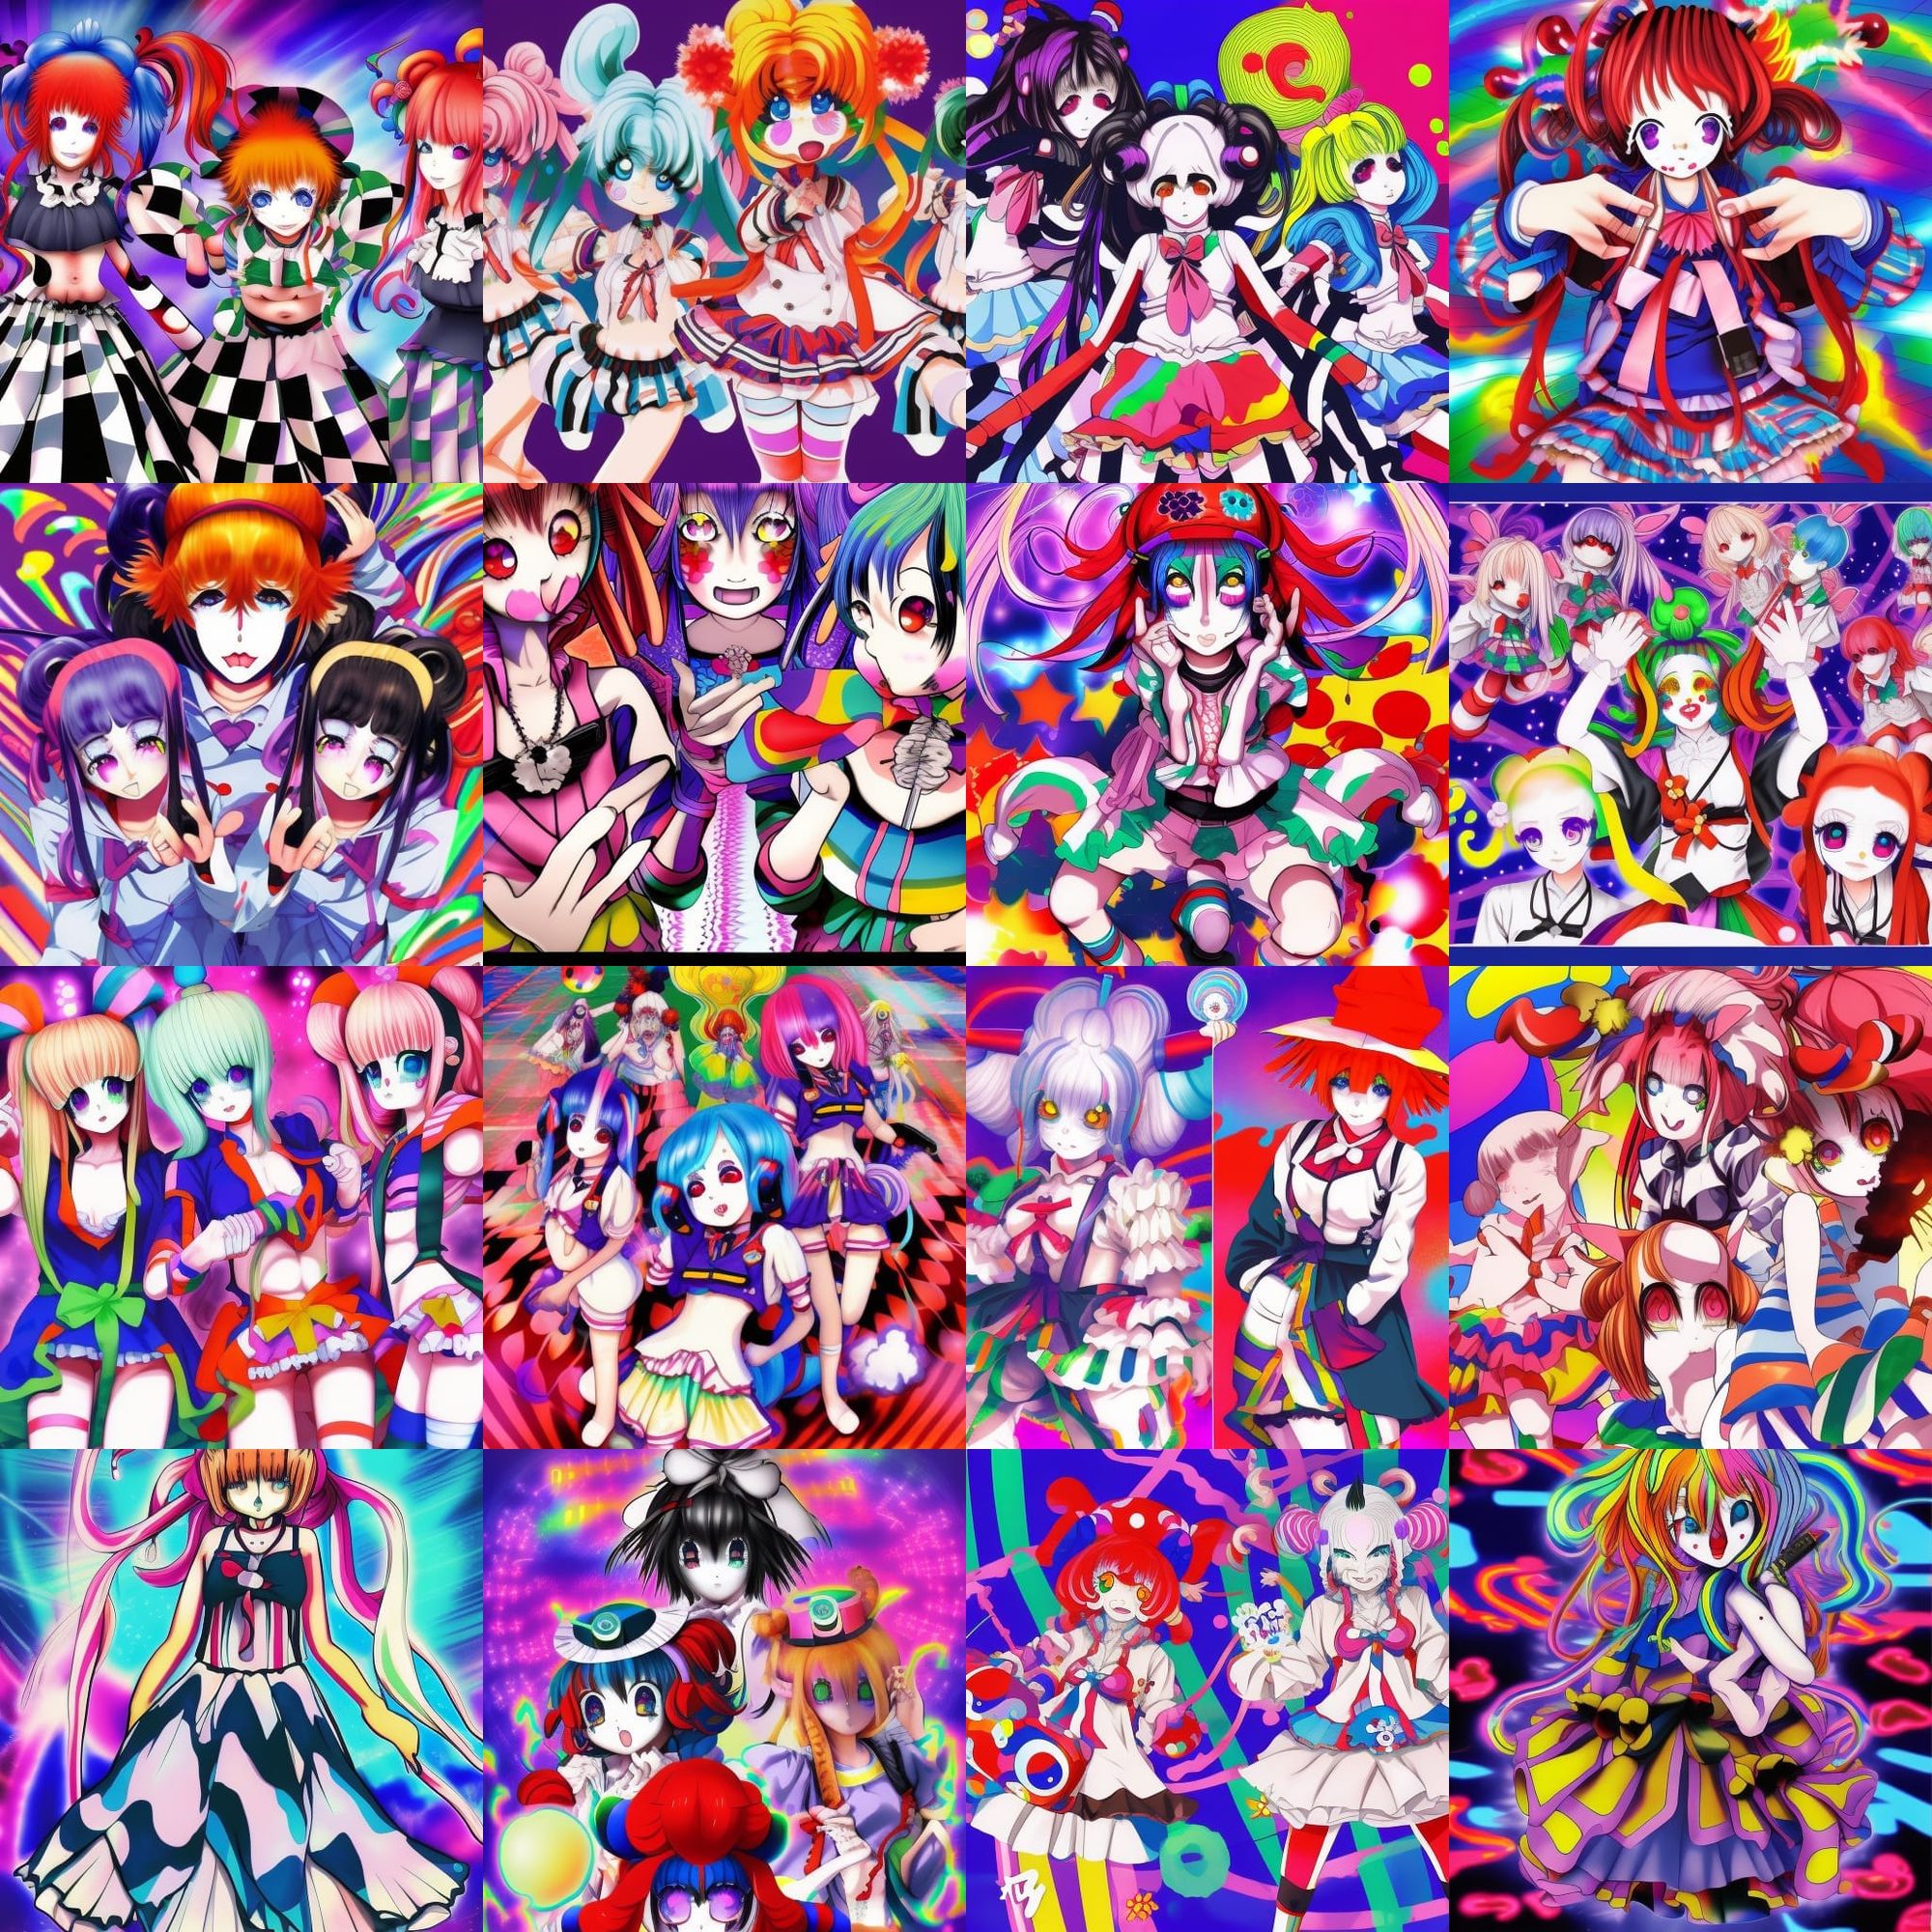 Psychedelic anime girls in different outfits : r/StableDiffusion